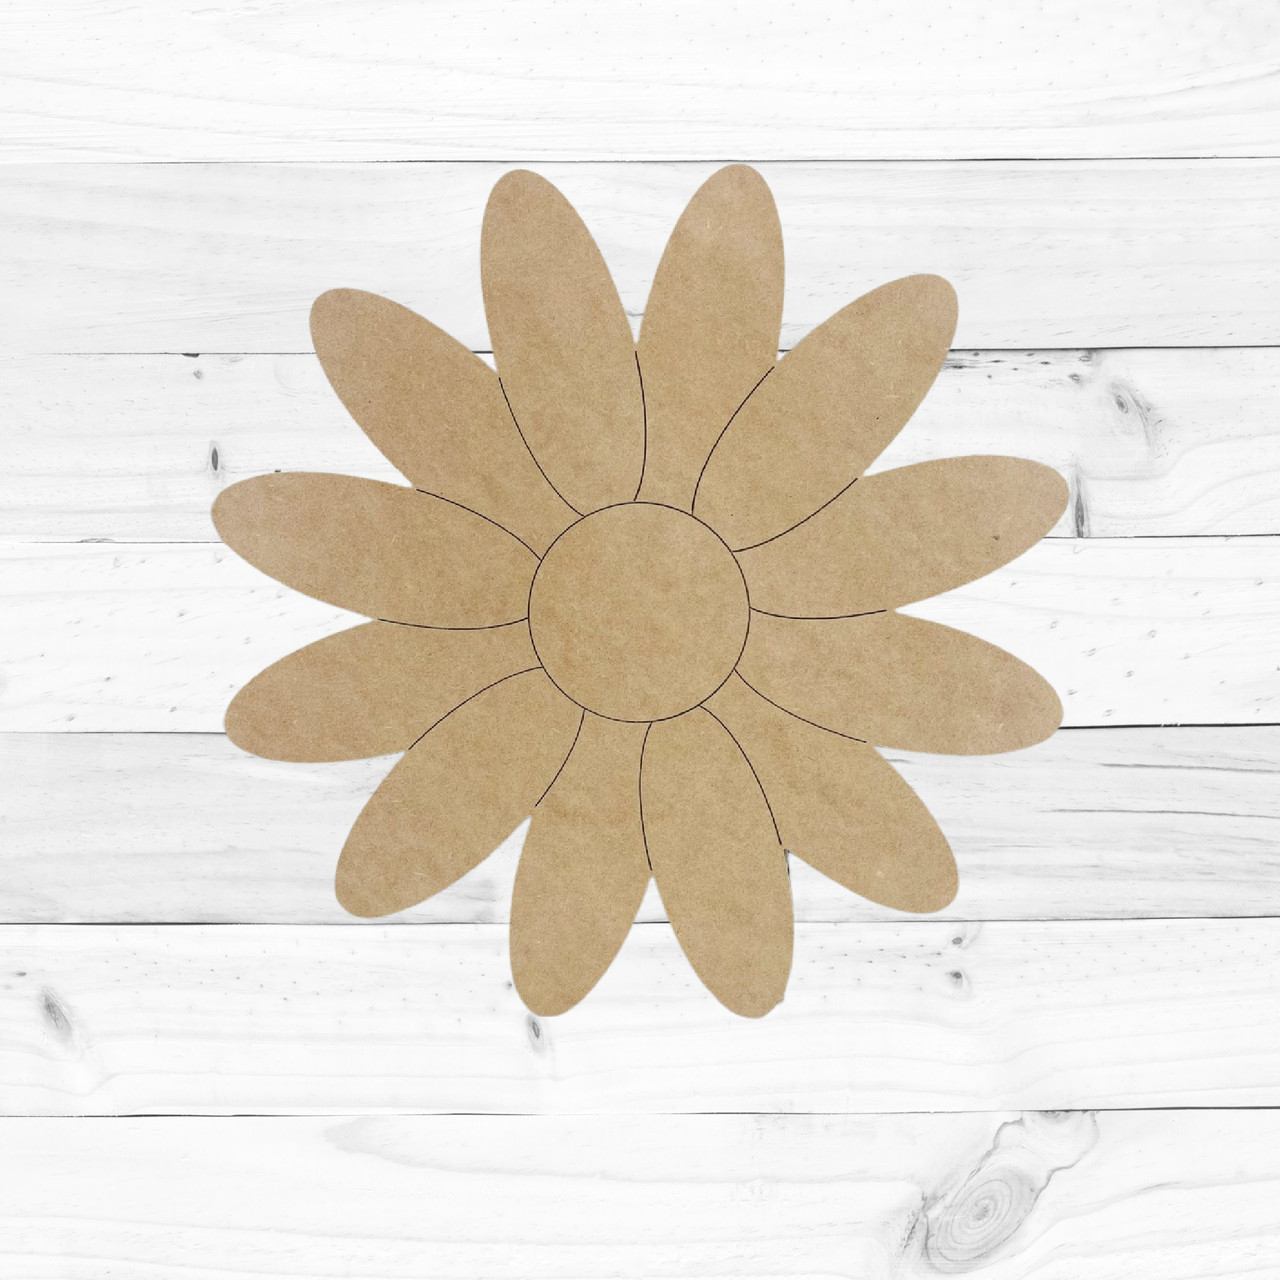 Winter and Spring Seasonal Shapes-Unfinshed wood shapes for